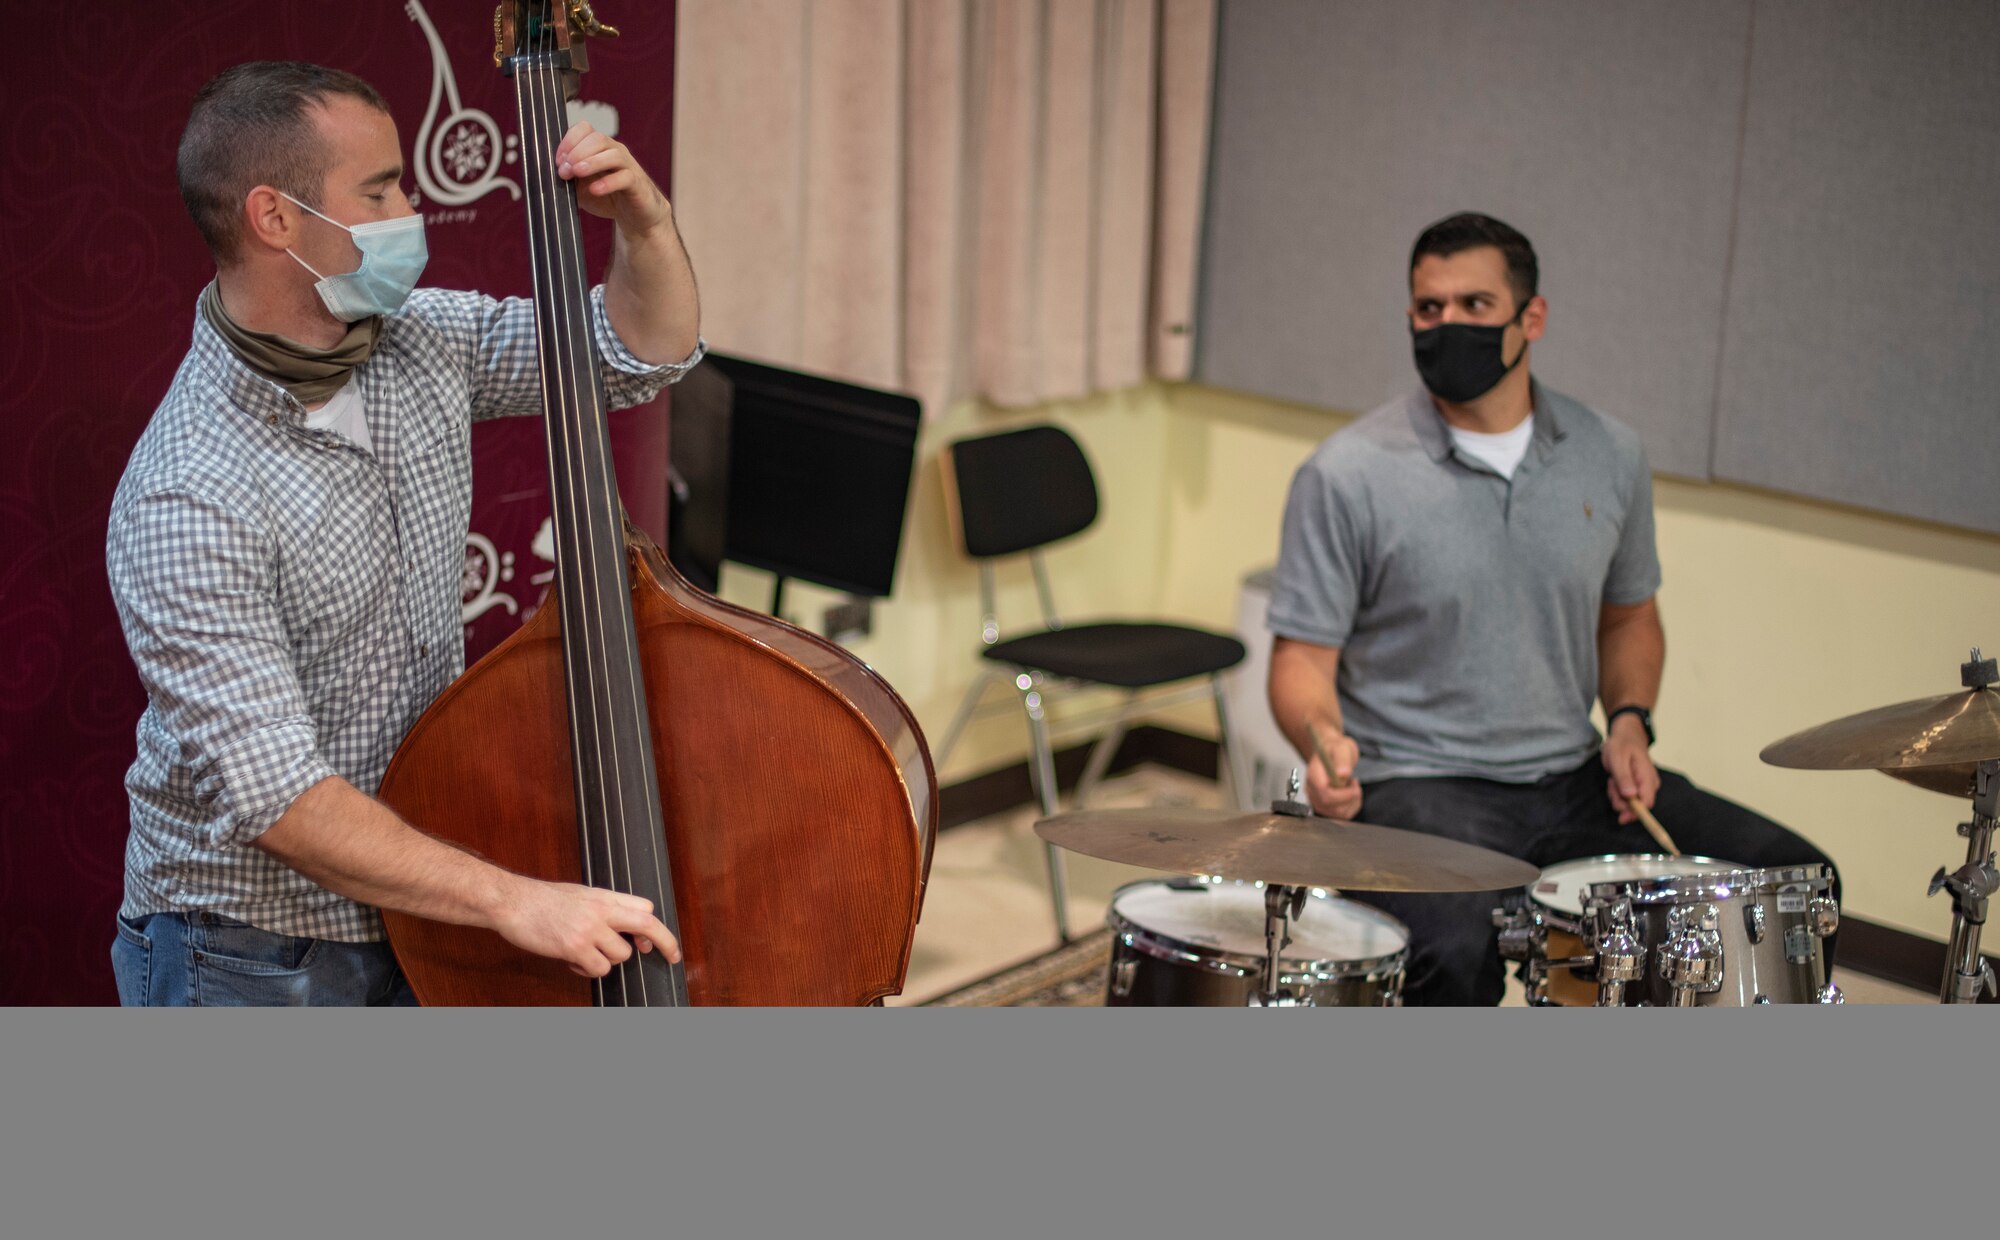 Senior Airman Dominic Sbrega (left) and Staff Sgt. Michael Coletti, U.S. Air Forces Central Band musicians, perform a jazz-improv routine at the Qatar Music Academy in Doha, Qatar, March 24, 2021. The AFCENT Band perform and tour in small ensembles throughout the region to promote positive troop morale, diplomacy and outreach to host-nation communities. (U.S. Air Force photo by Tech. Sgt. Travis Edwards)